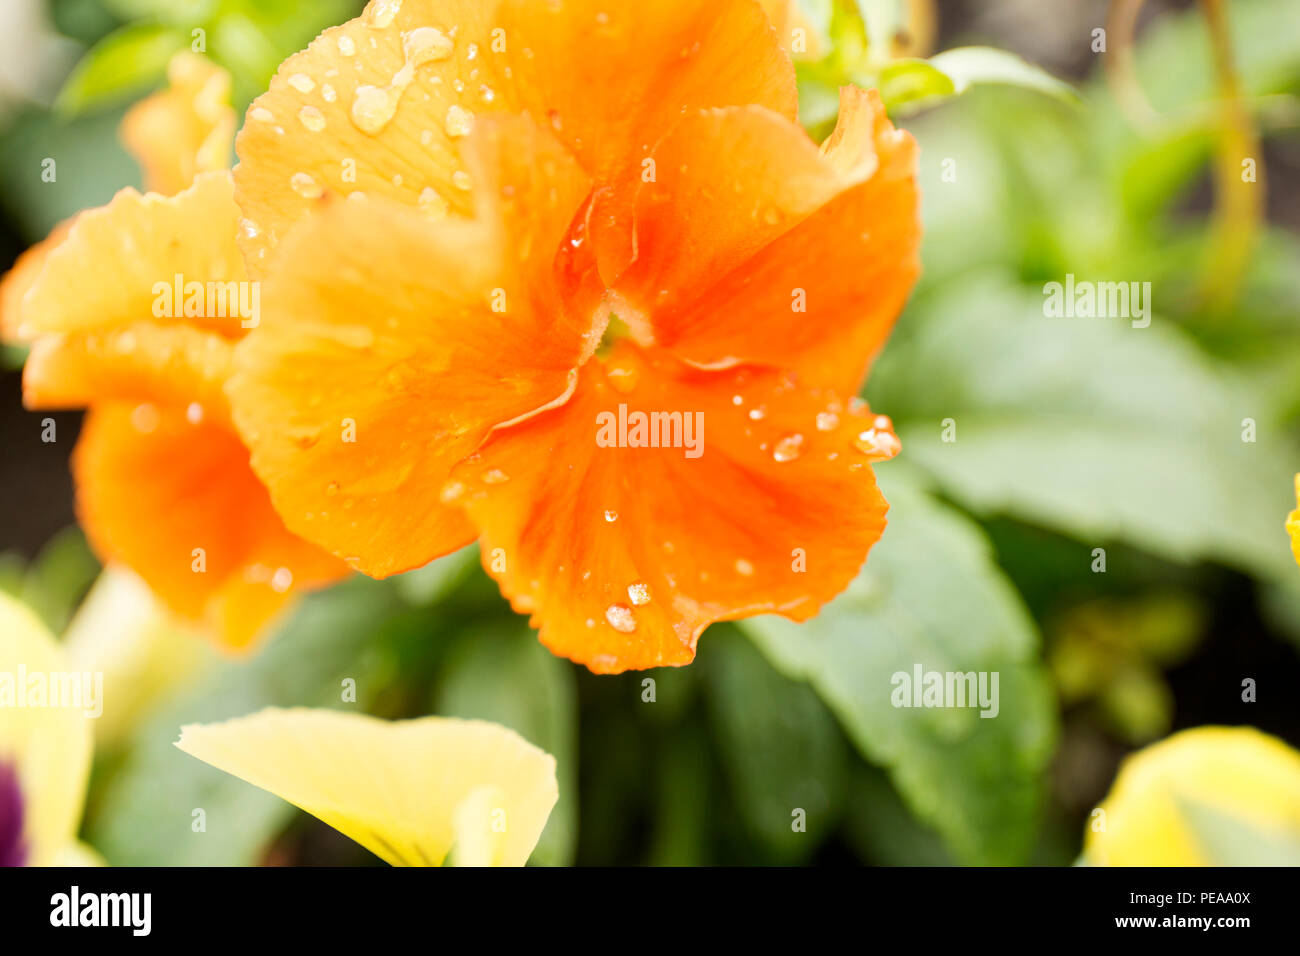 Orange color pansy flower with dew drops on blur background. Stock Photo